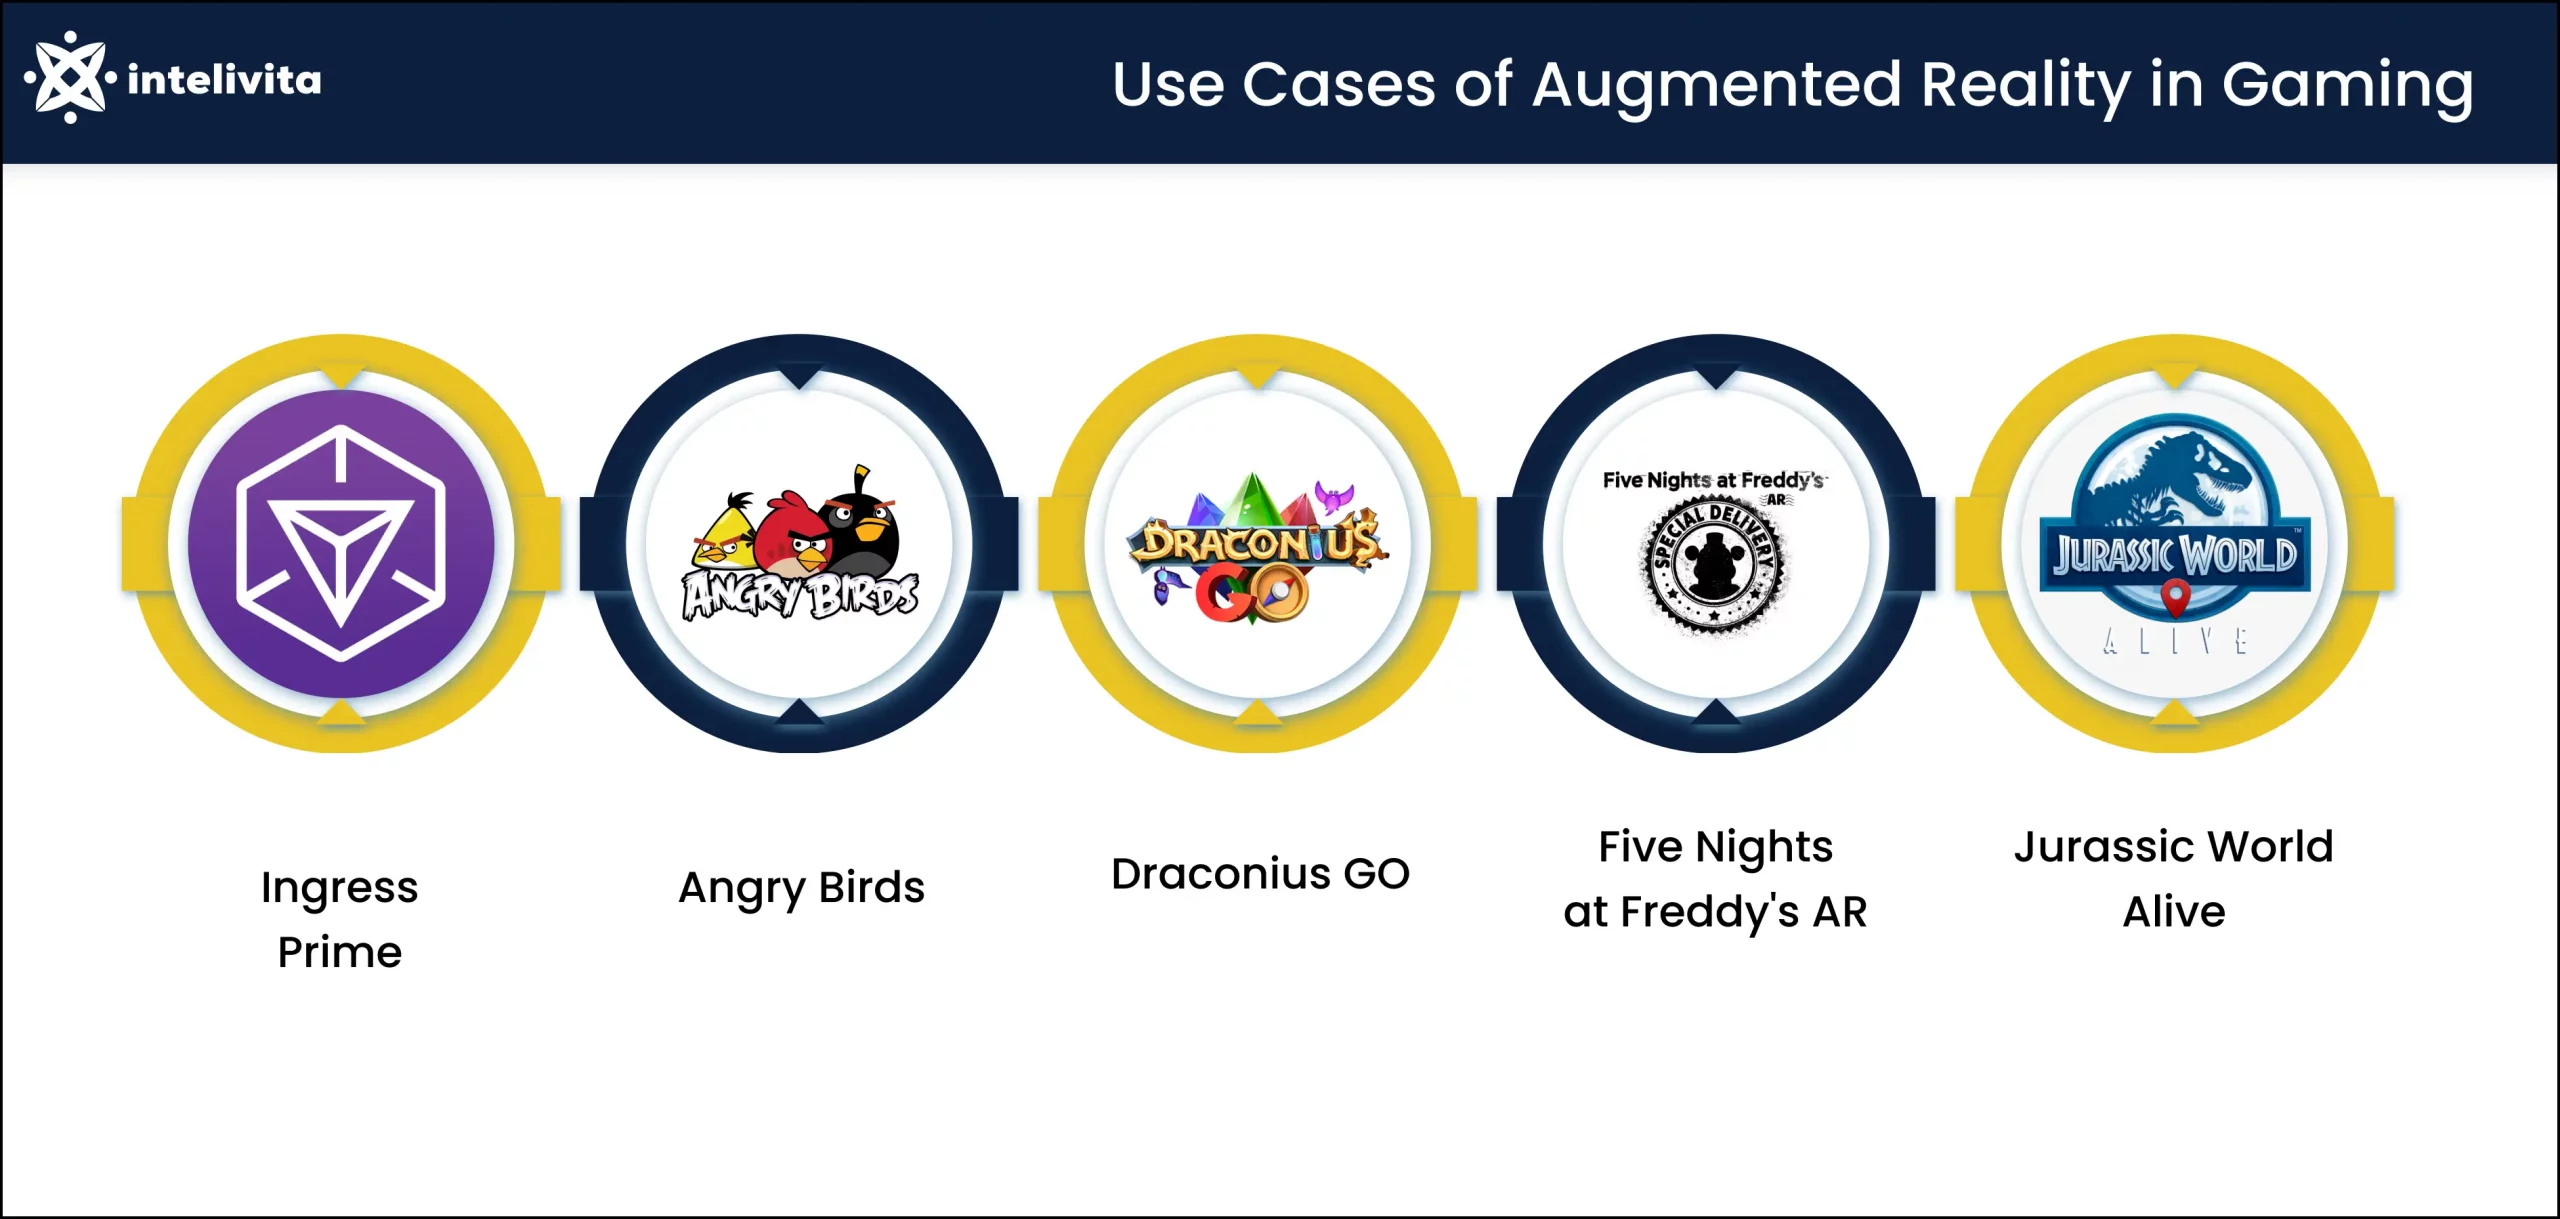 Image depicting the Use Cases of Augmented Reality in Gaming, namely: Ingress Prime, Angry Birds, Draconius GO, Five Nights at Freddy's AR, and Jurassic World Alive.